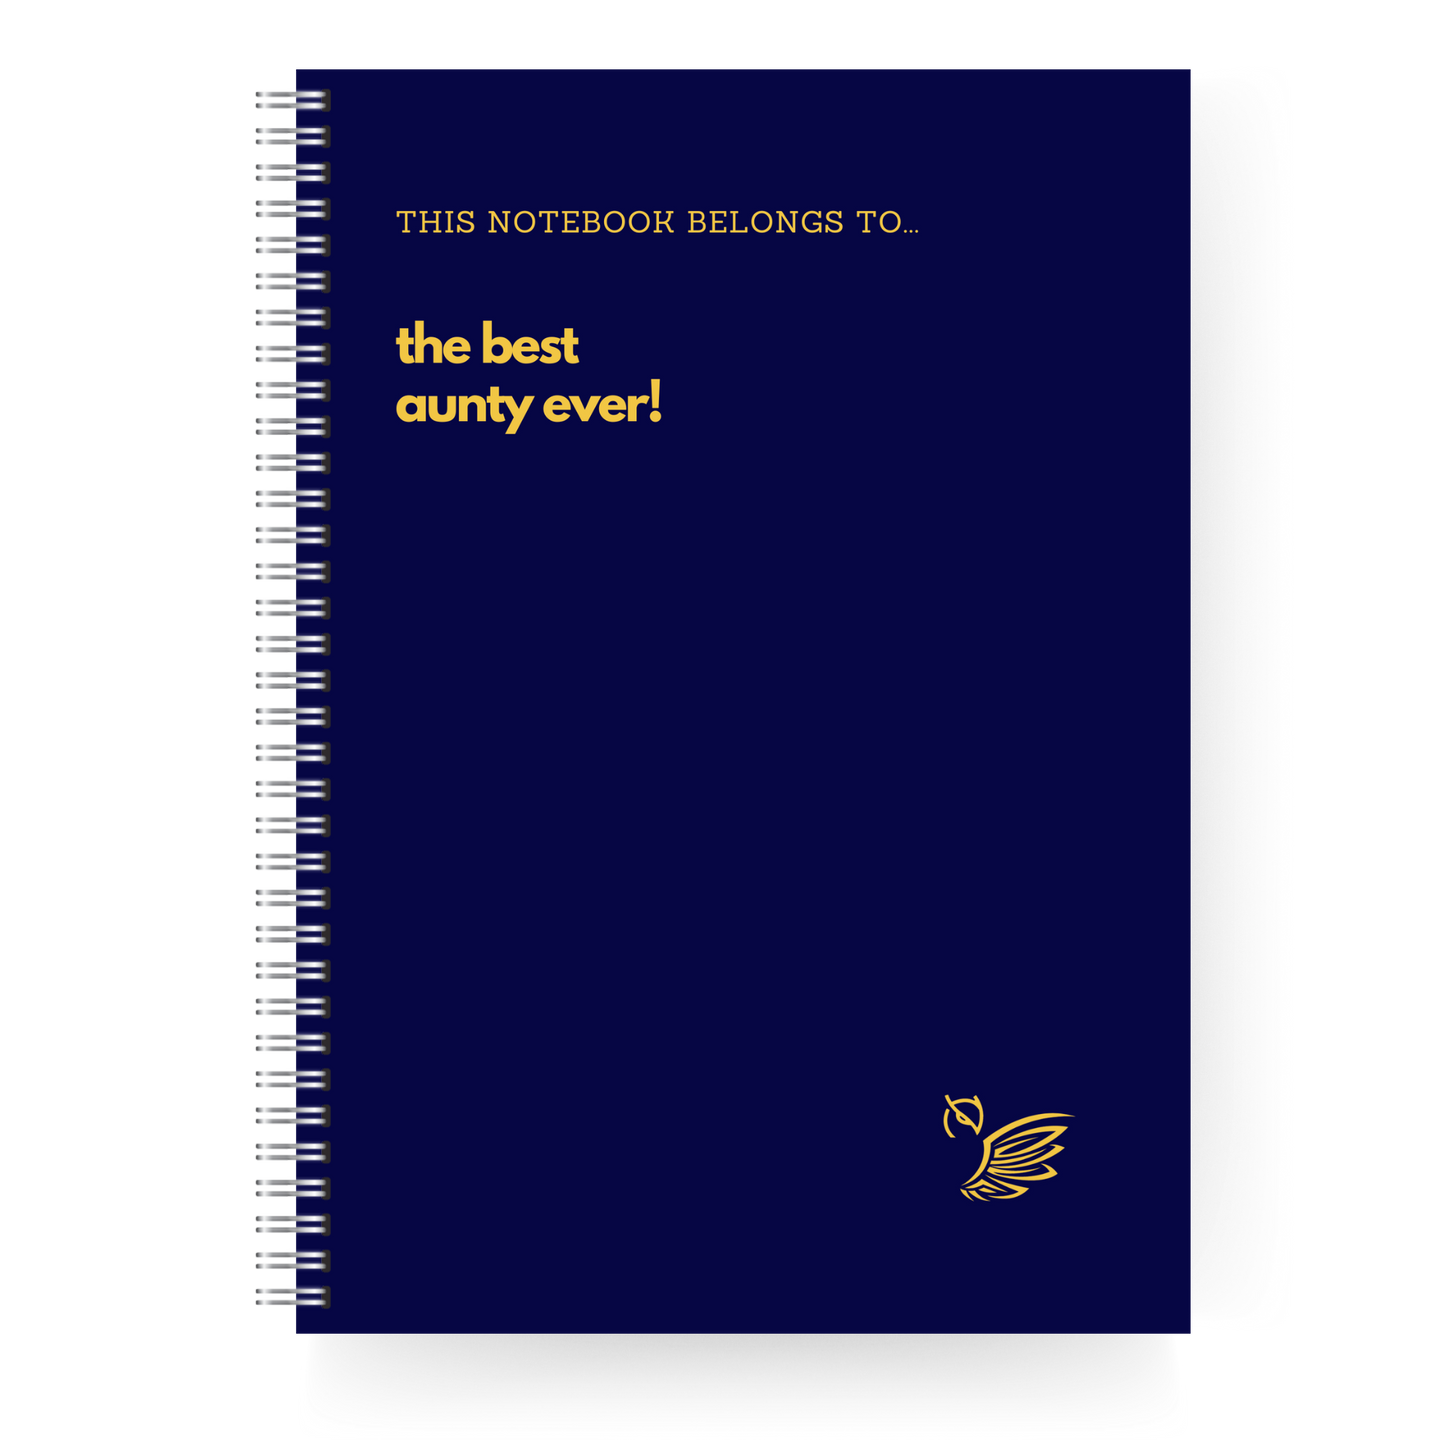 This Notebook Belongs To... The Best Family Member!